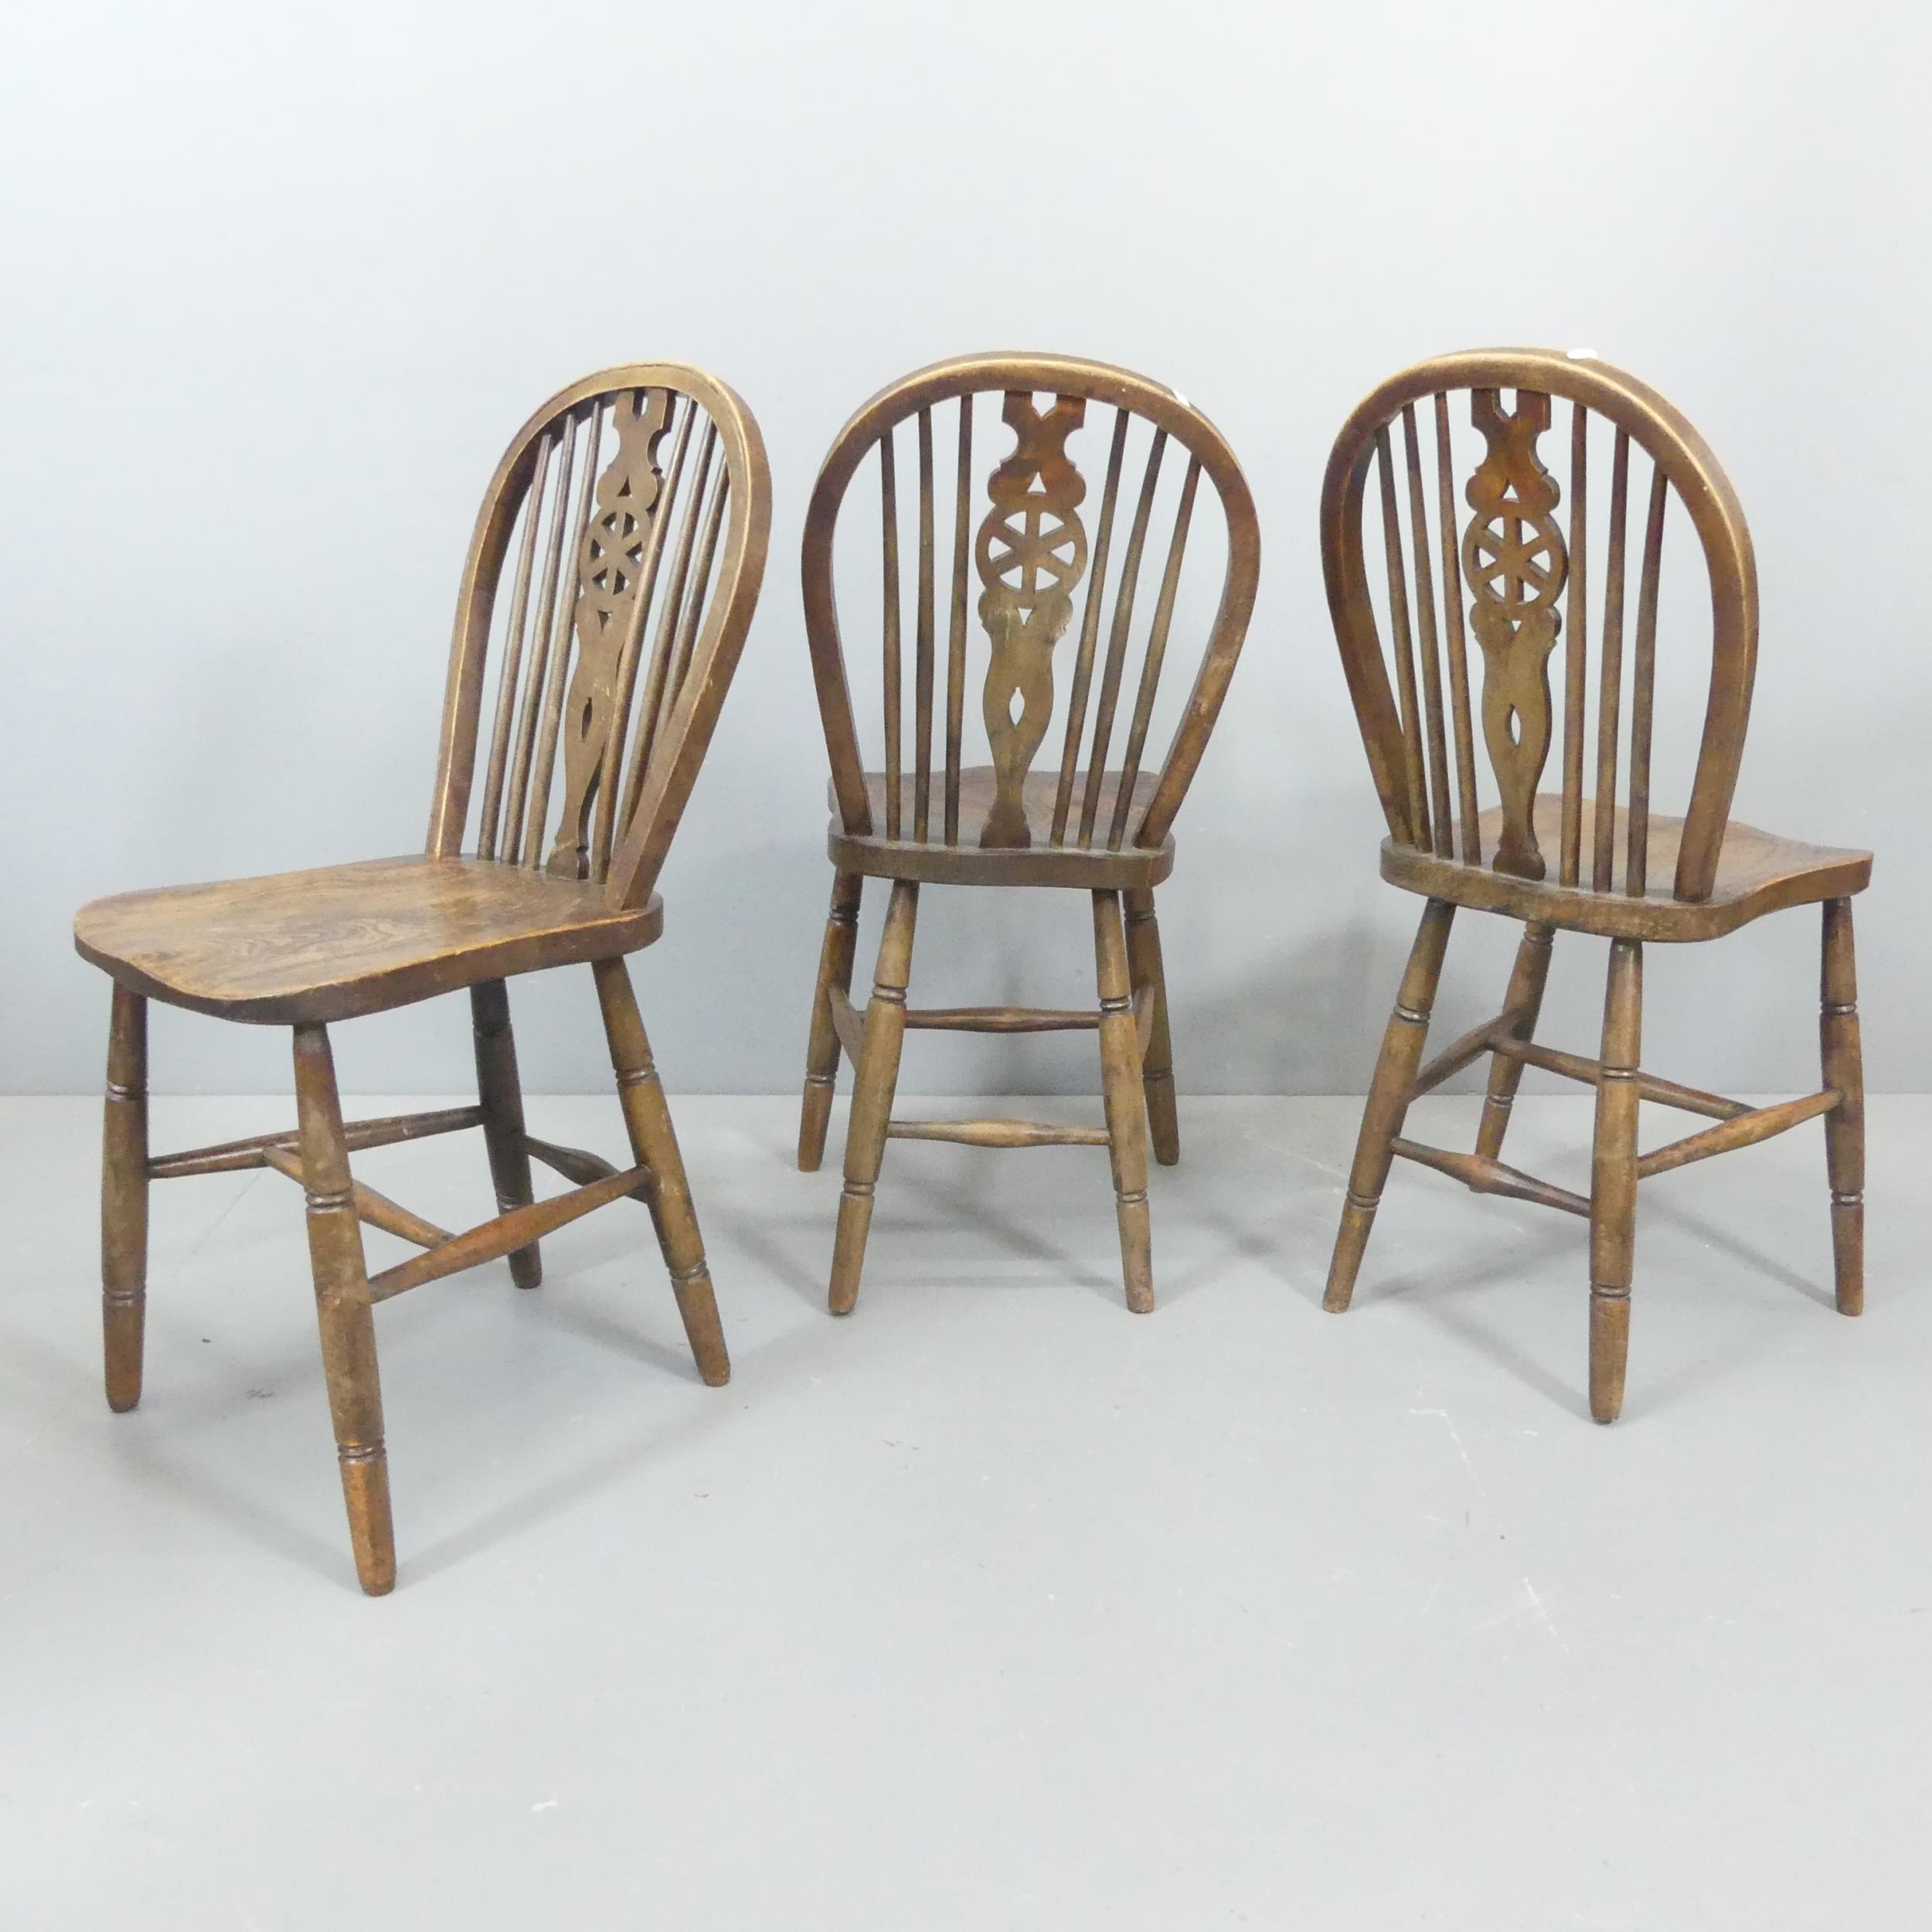 Three 19th century elm-seated wheel back dining chairs. Good condition, with some signs of age and - Image 2 of 2